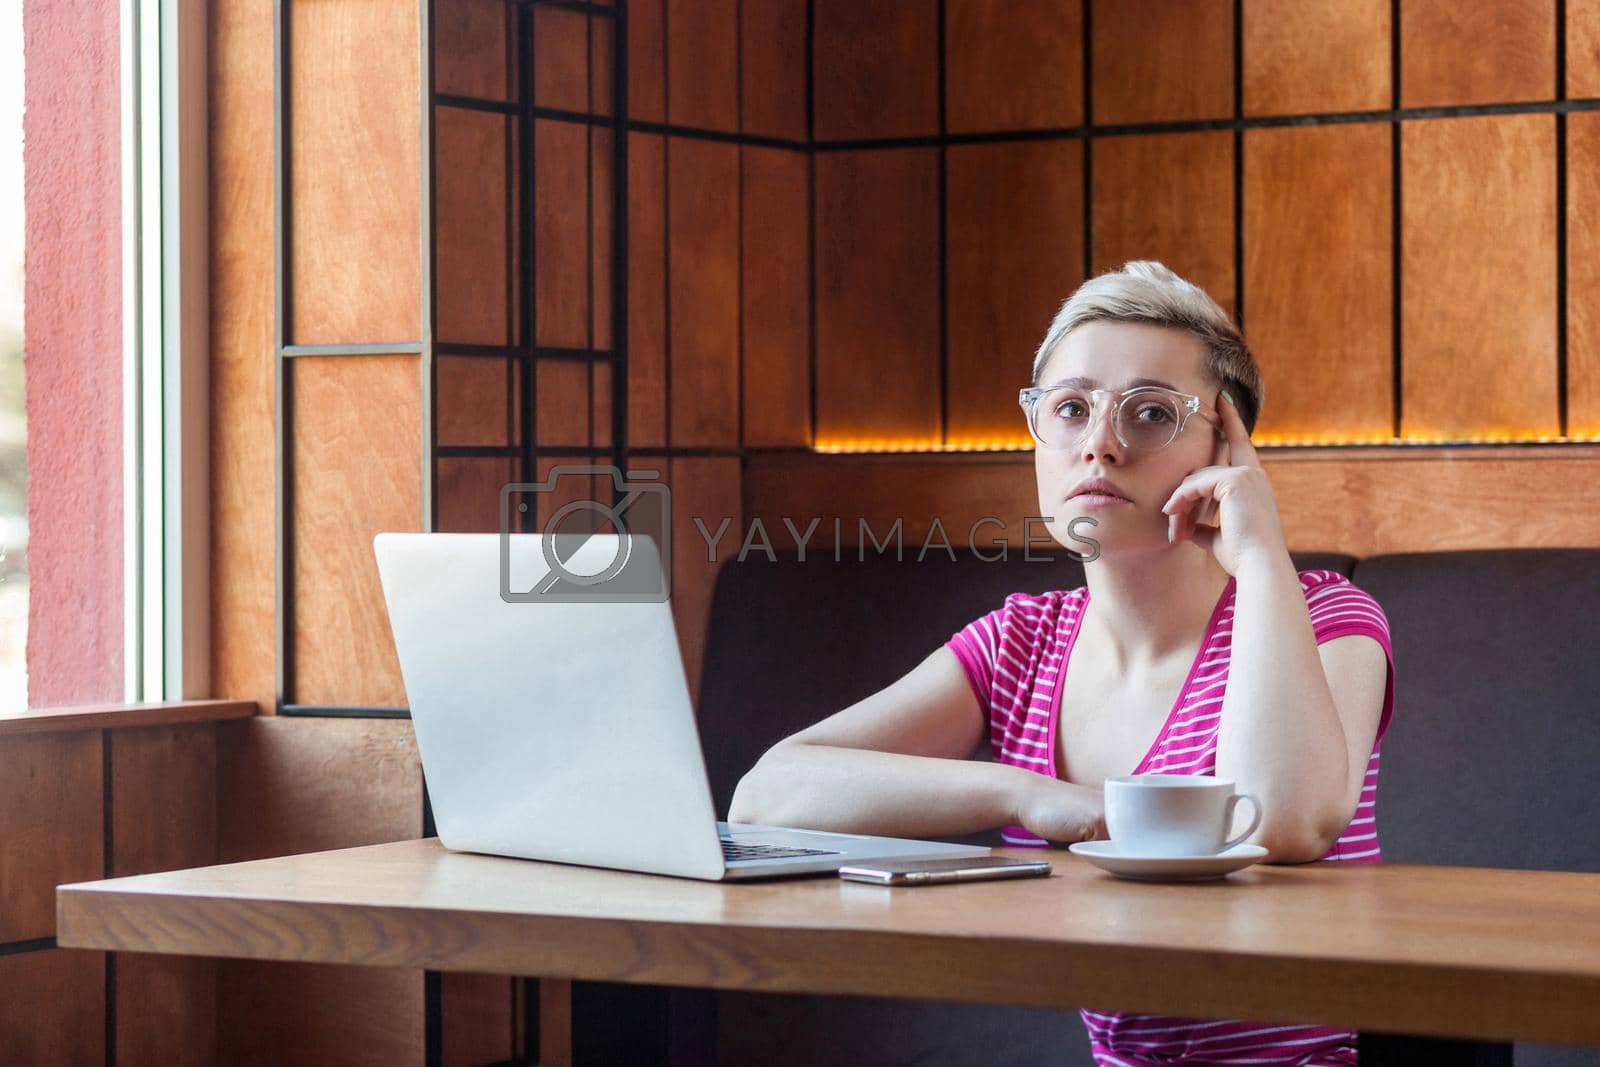 Royalty free image of Emotional young woman sitting and working in office by Khosro1